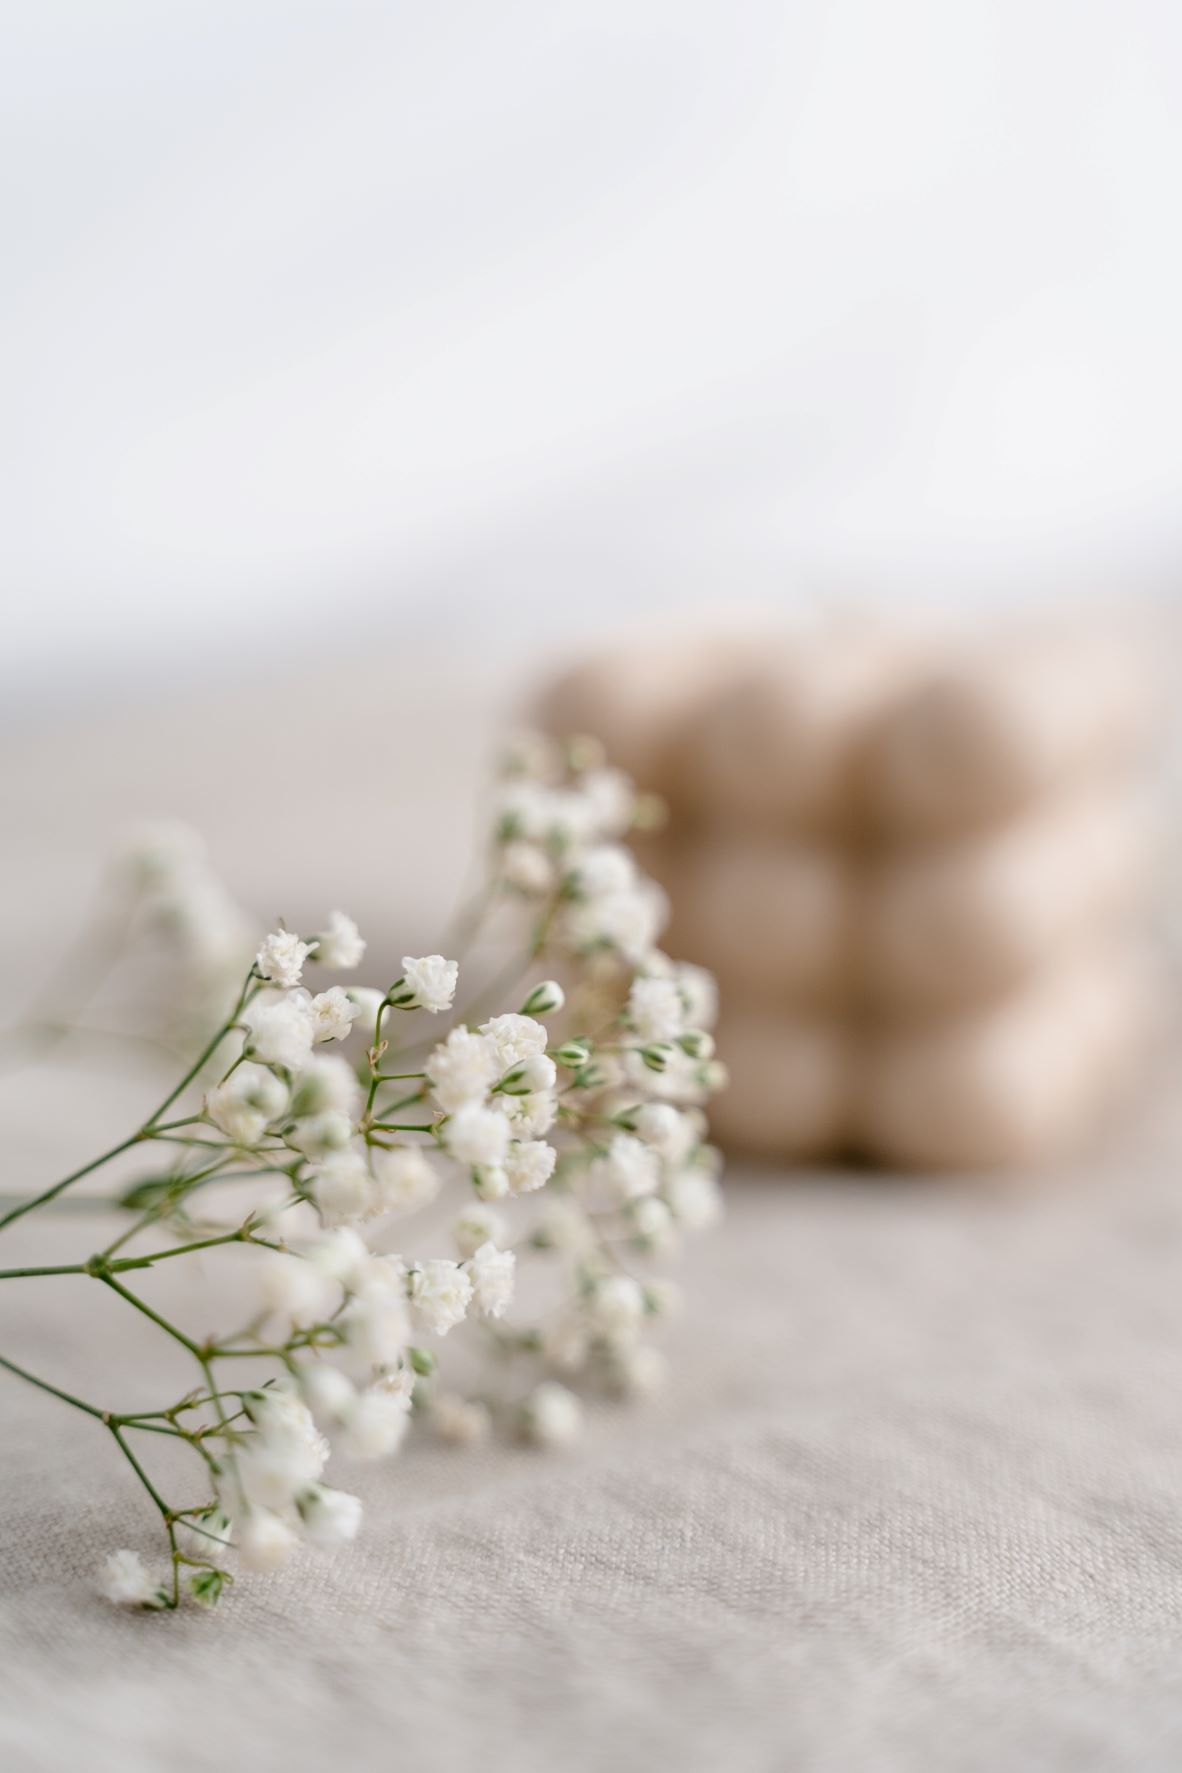 White babys breath flowers are displayed on a beige linen table cloth